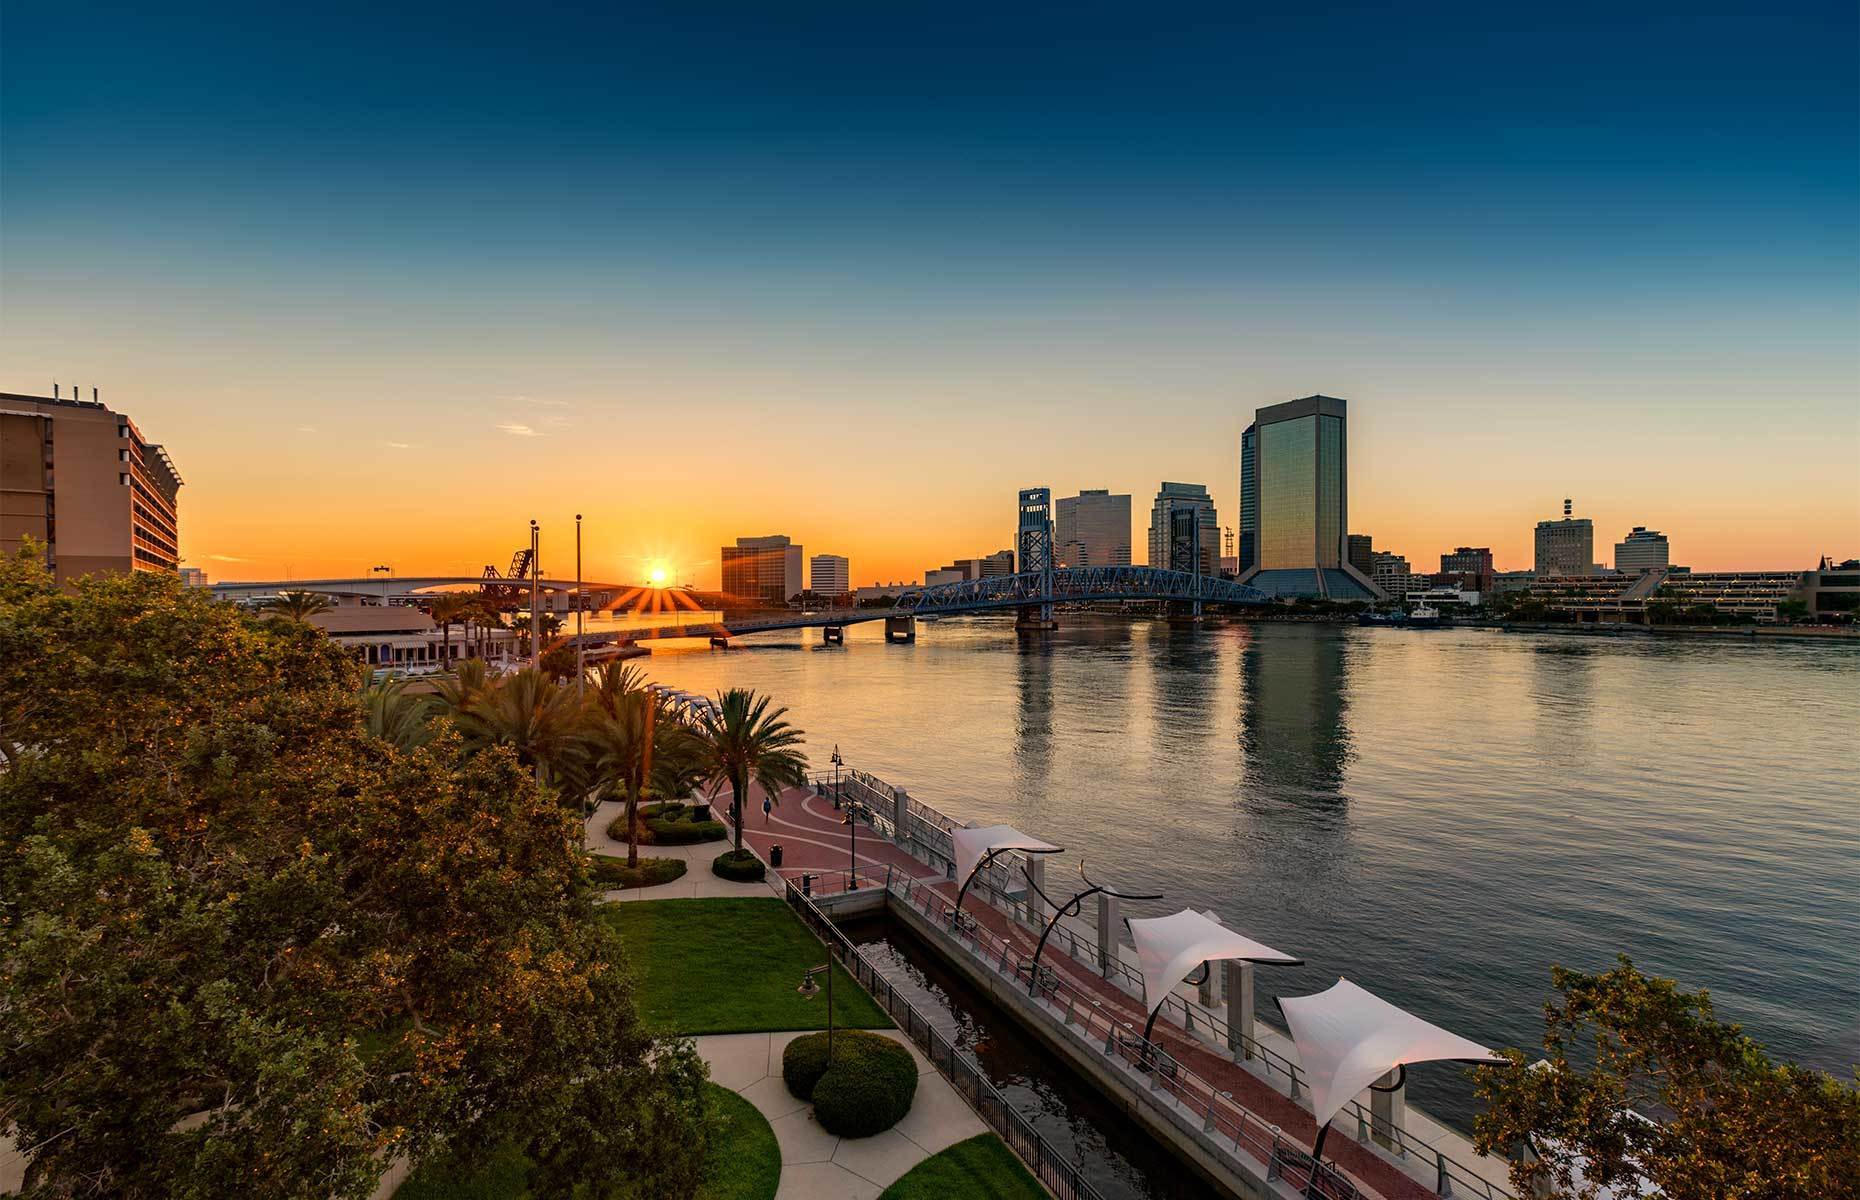 <p class="p1"><span>Jax, as locals like to call it, is full of surprises from morning to night. During the day, choose from among its <a href="https://www.visitjacksonville.com/things-to-do/culture/museums/" rel="noreferrer noopener"><span>nearly 20 museums</span></a> and <a href="https://www.visitjacksonville.com/things-to-do/beaches-water/" rel="noreferrer noopener"><span>numerous beaches</span></a>. Once evening falls, be sure to leave room in your schedule for enjoying a rooftop beverage. Jacksonville boasts no fewer than <a href="https://www.visitjacksonville.com/blog/jacksonvilles-top-rooftop-bars/" rel="noreferrer noopener"><span>nine rooftop bars</span></a> where patrons feel as though they’re sitting on top of the world.</span></p>